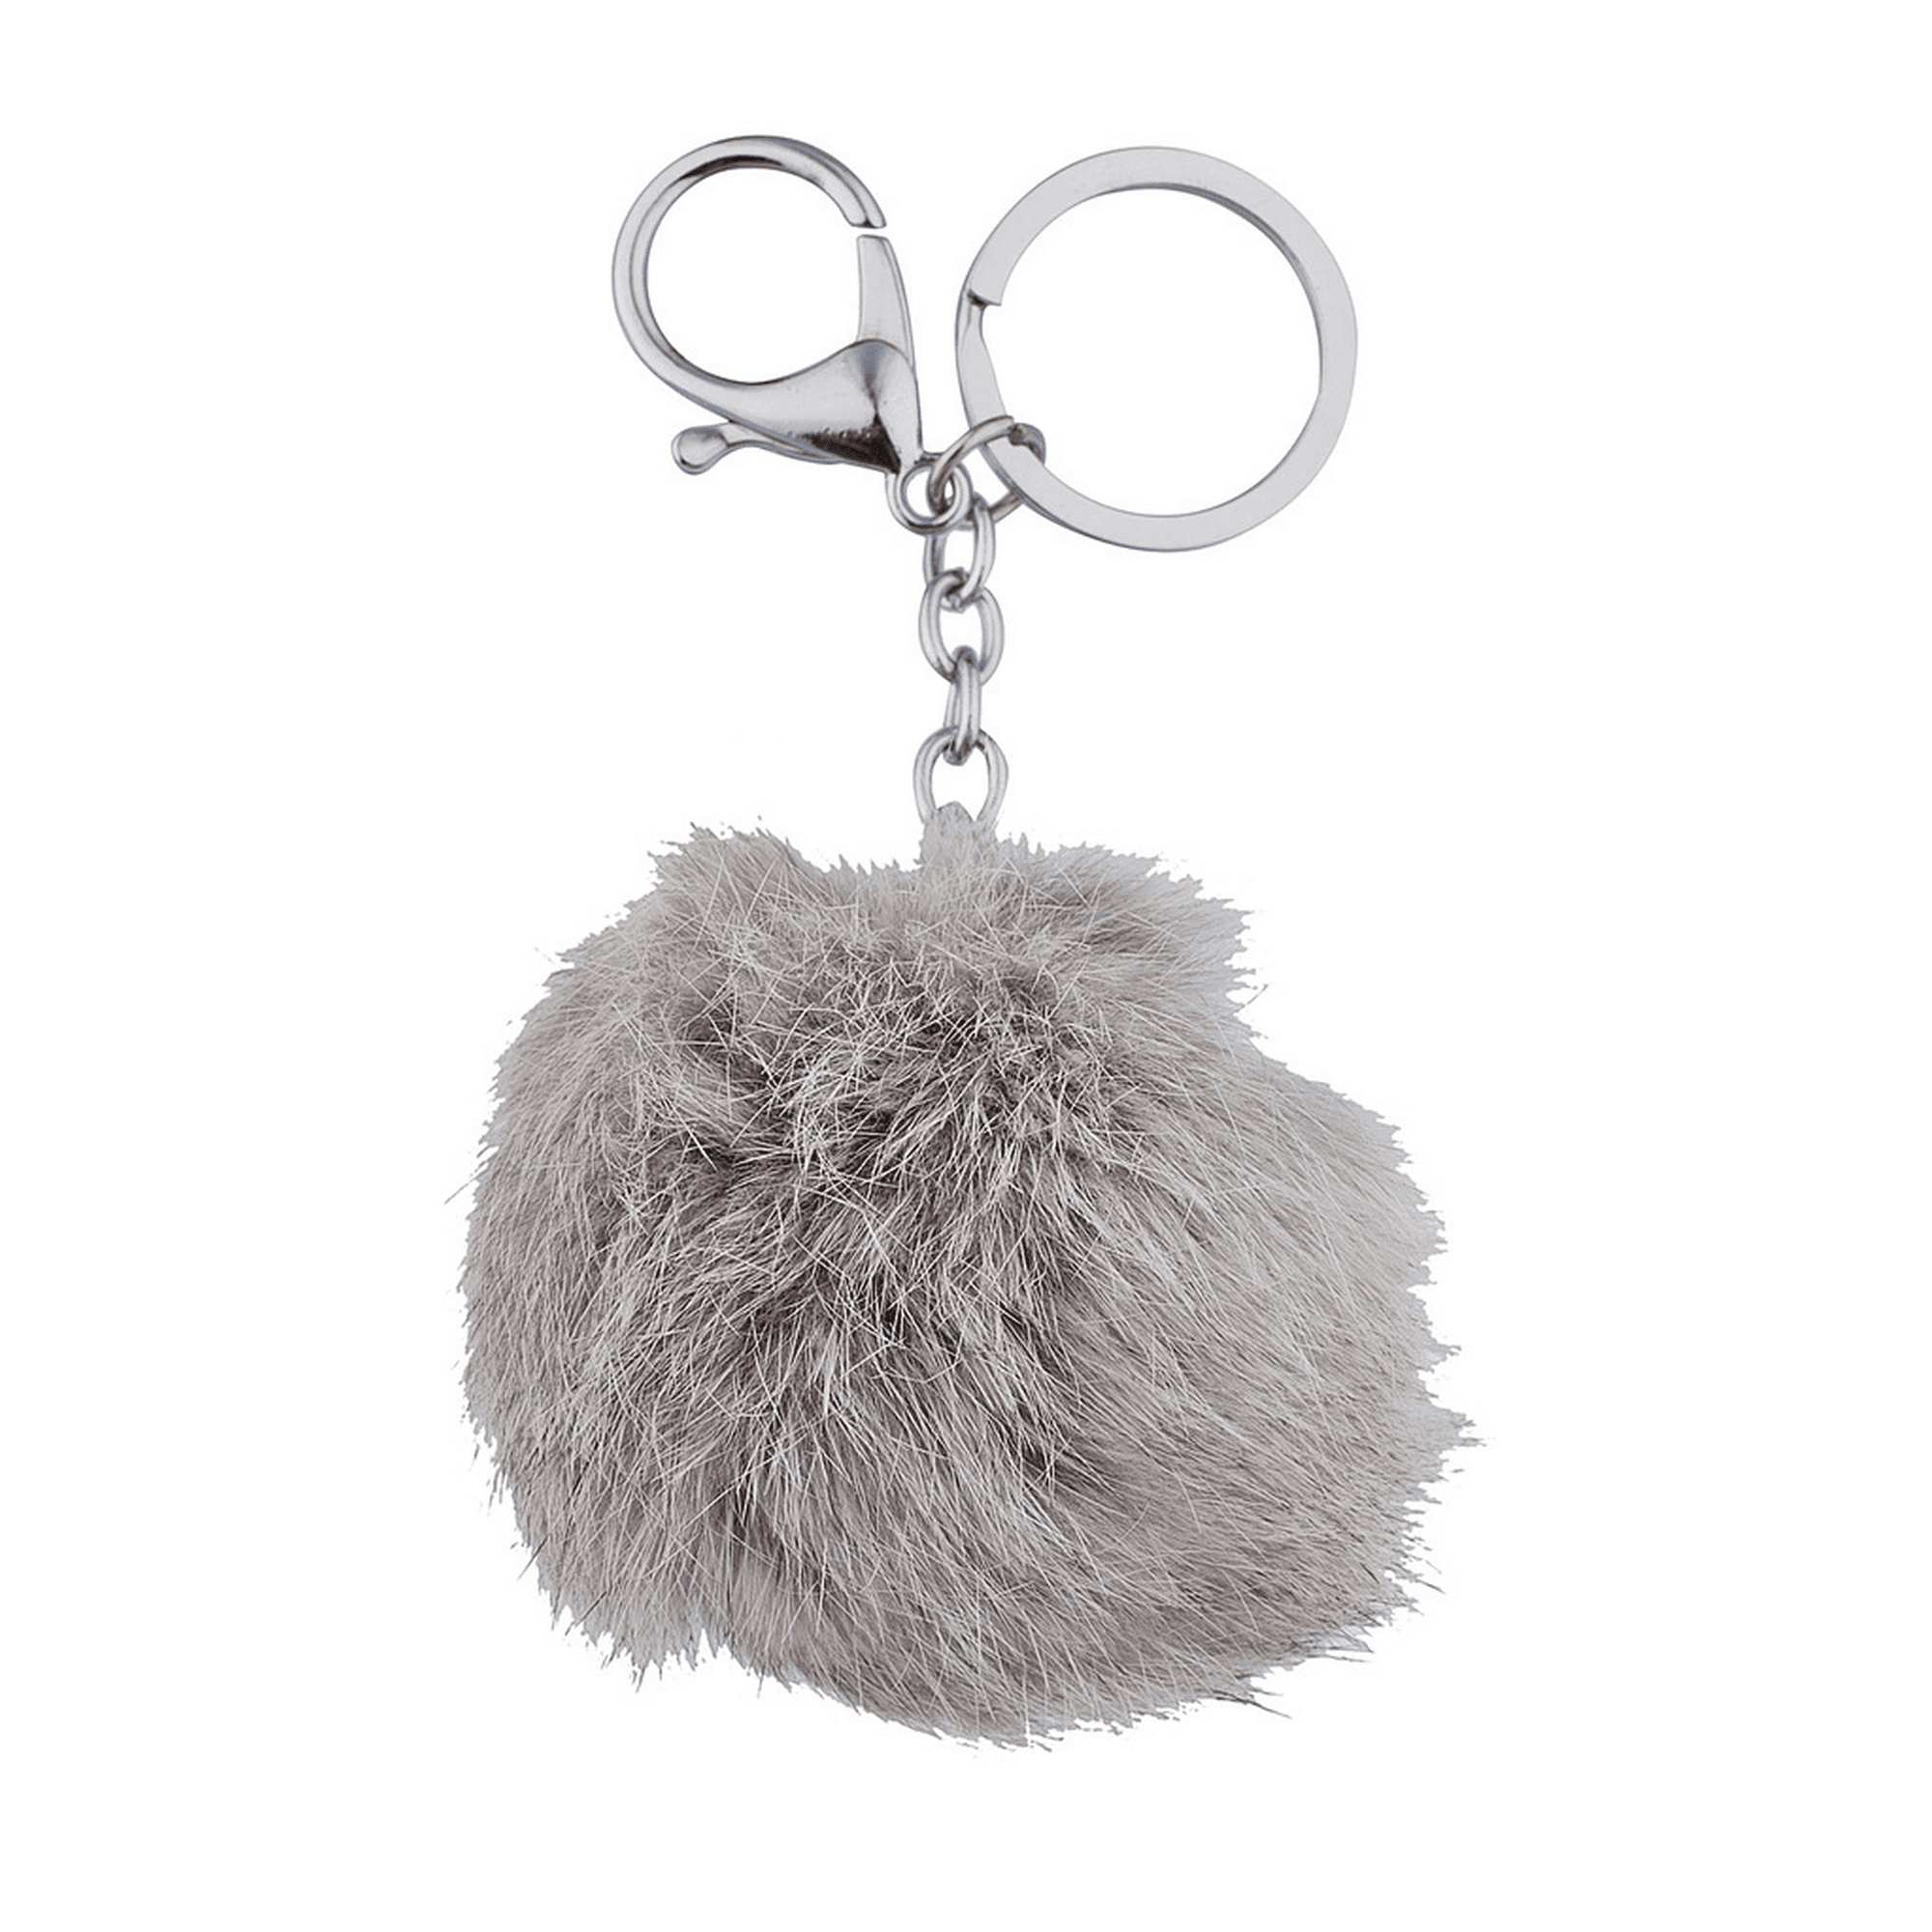 Free Shipping Lux Mouse Key Chain Sets. Three Colors 